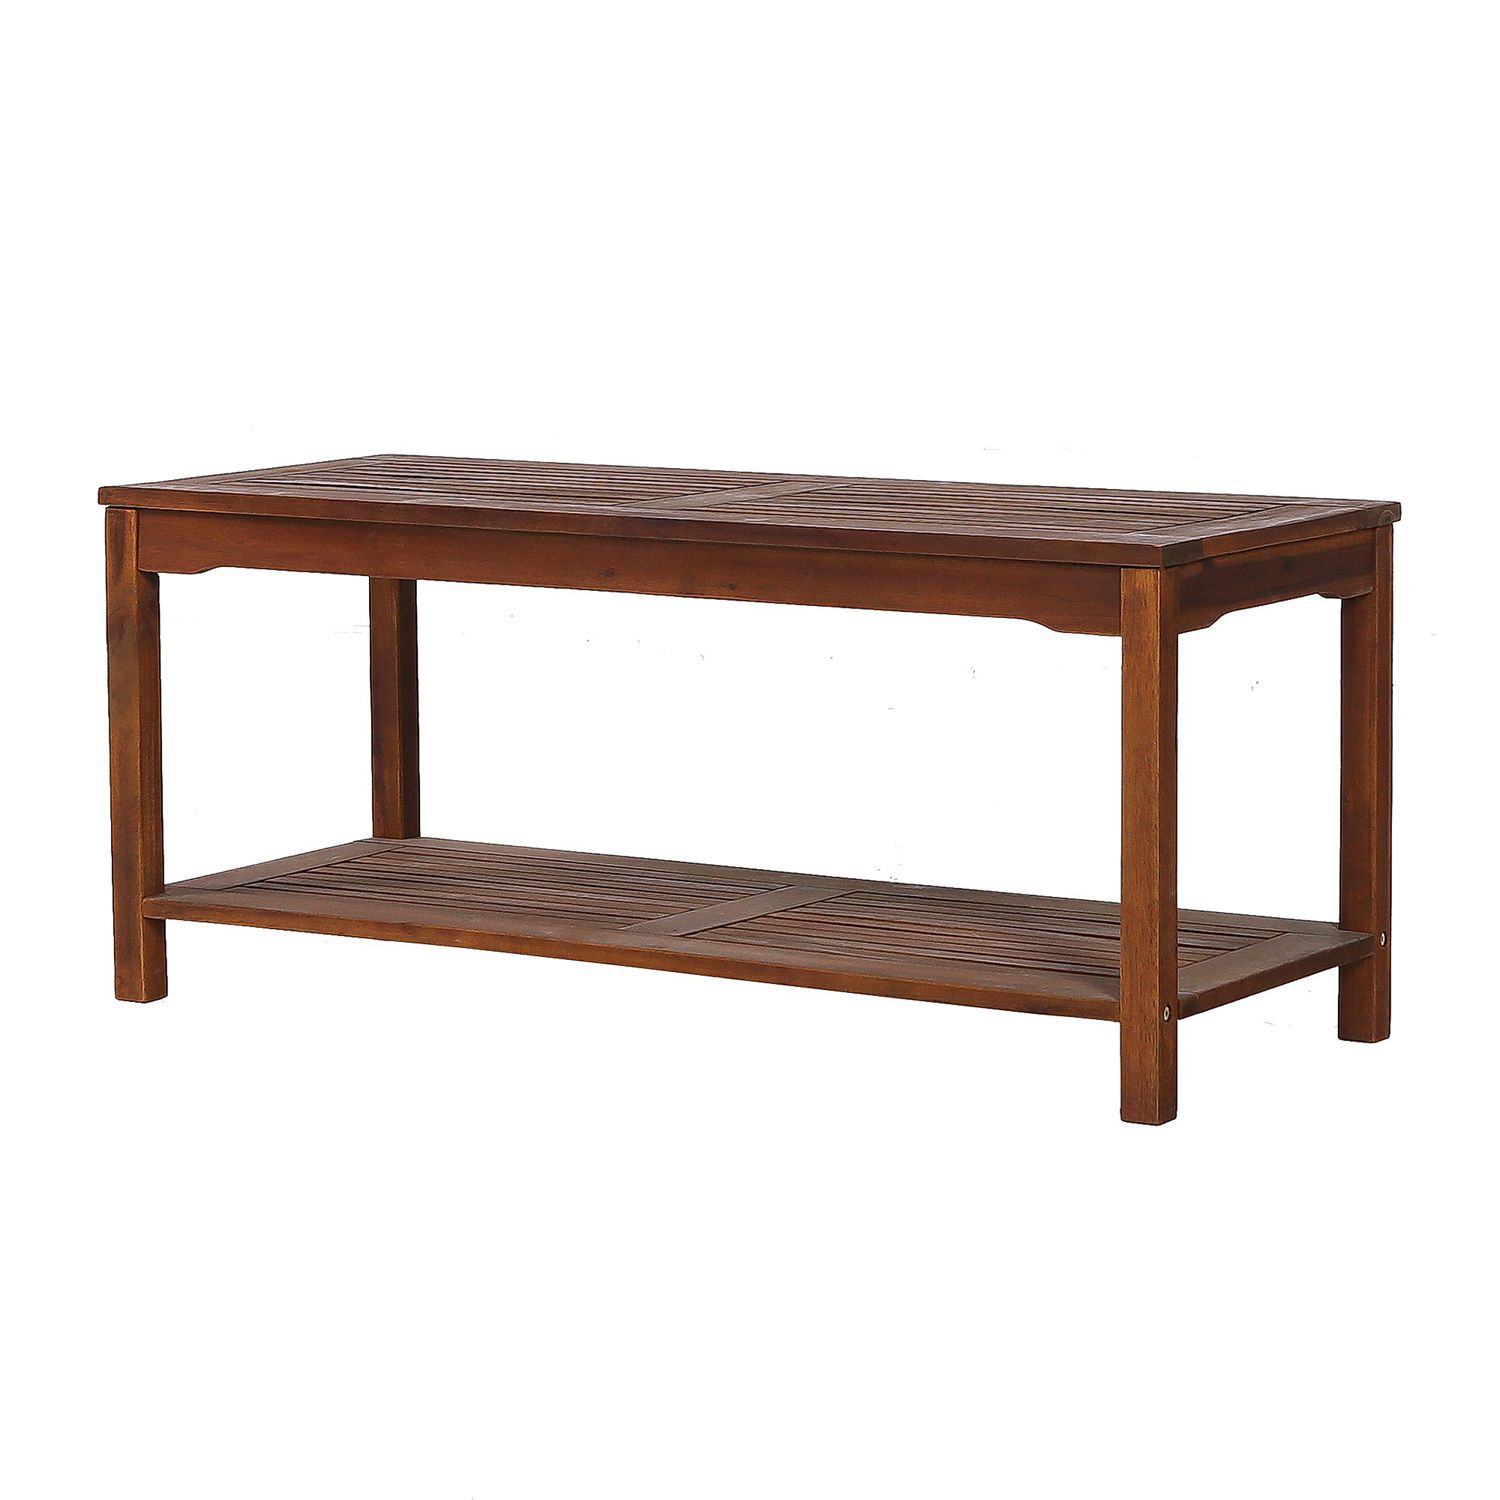 Acacia Wood Patio Coffee Table – Pier1 Imports With Regard To Natural Dark Oil Acacia Outdoor Arm Chairs (View 4 of 15)